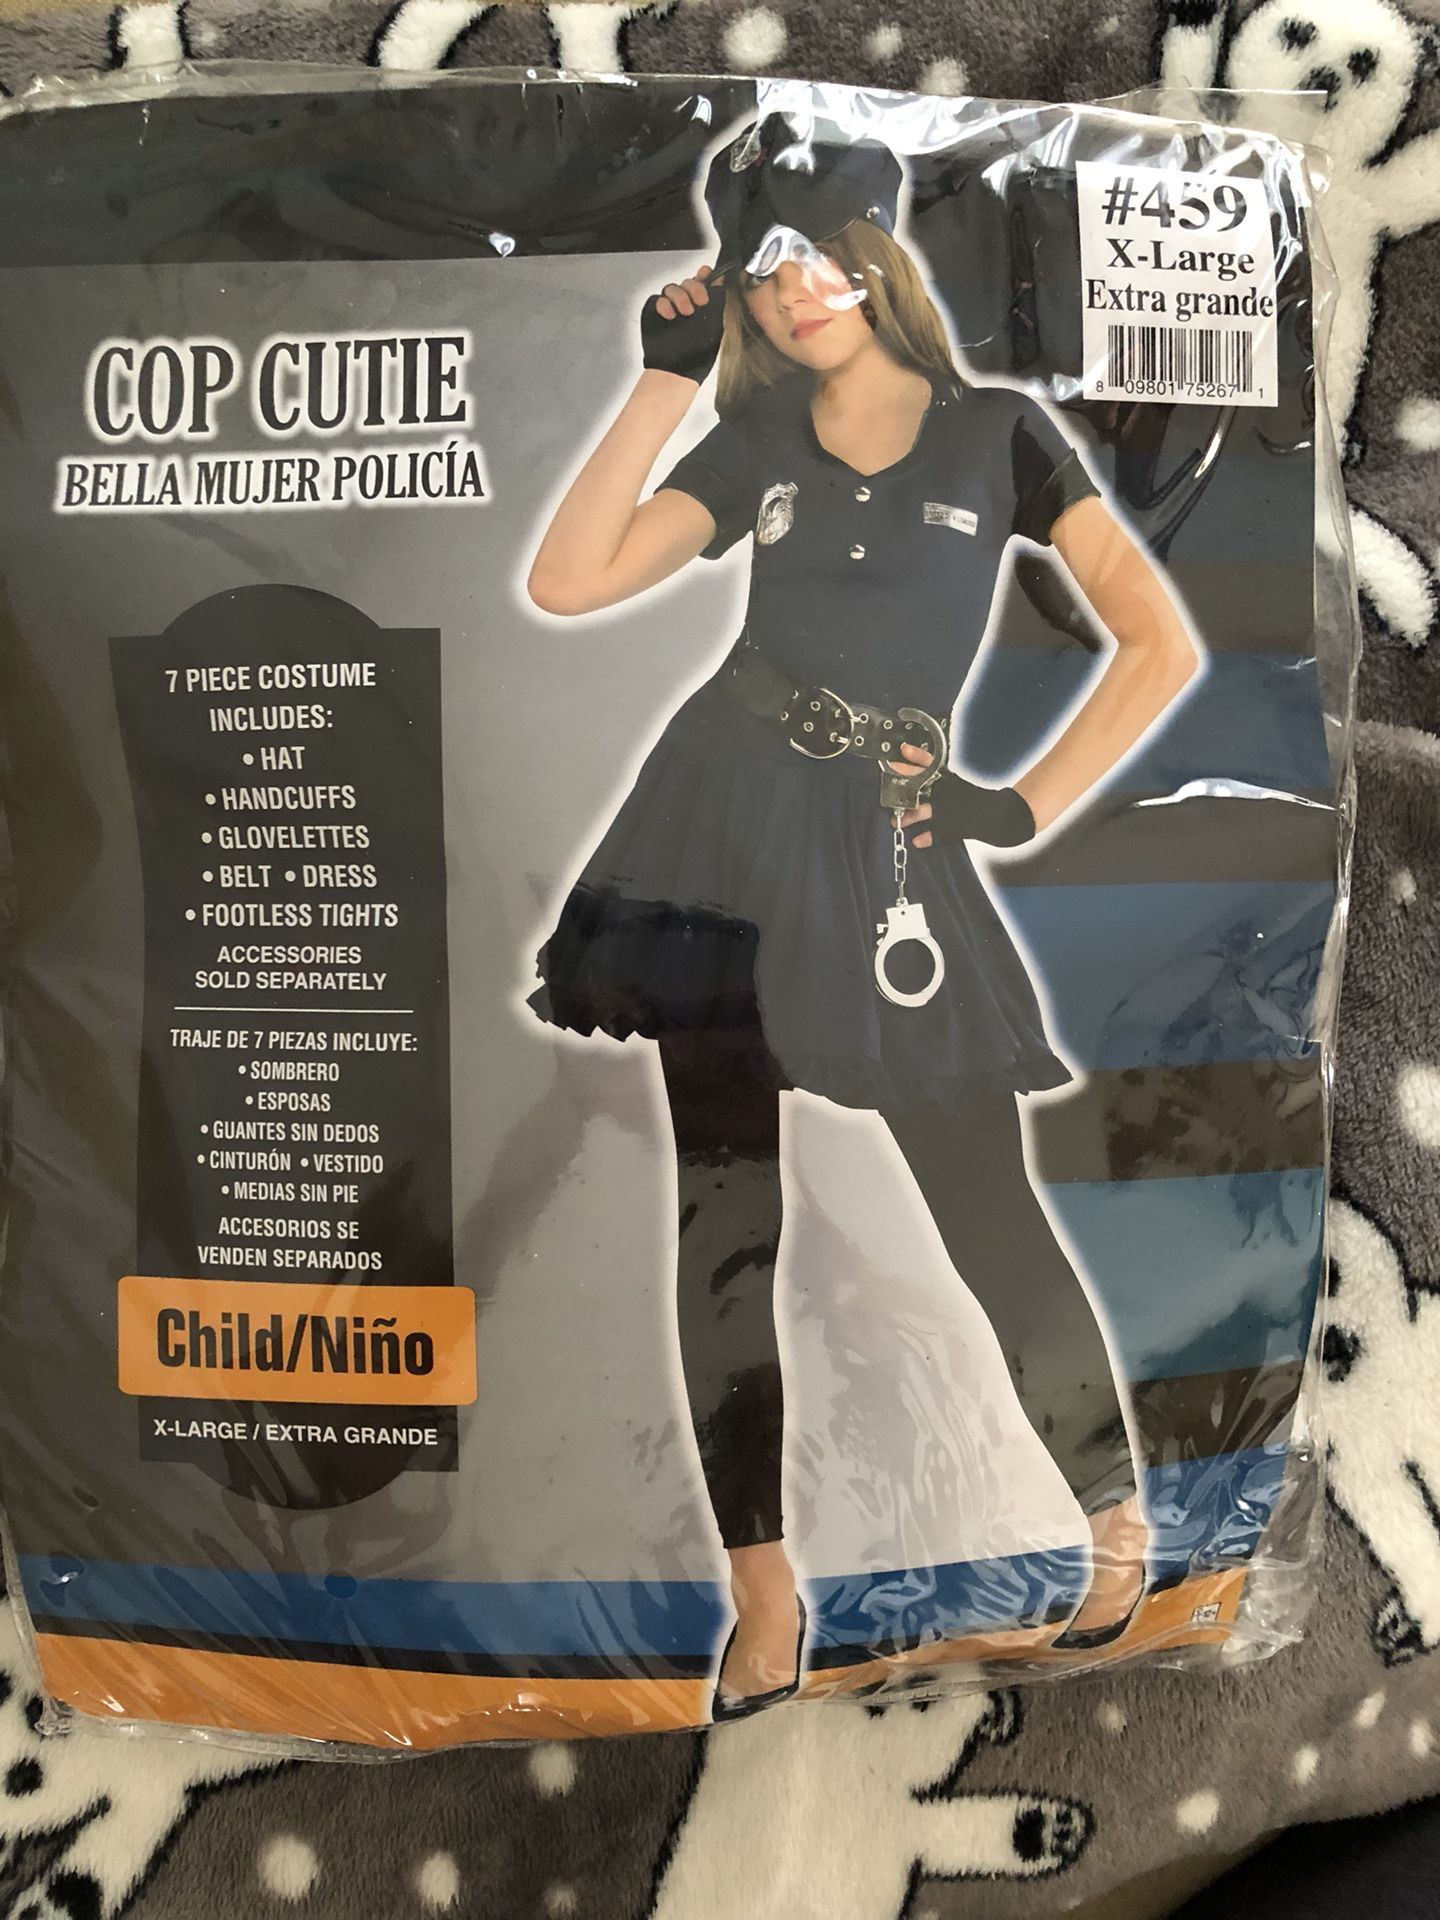 Cop Cutie Girls Costume XL for Sale in Fort Worth, TX - OfferUp